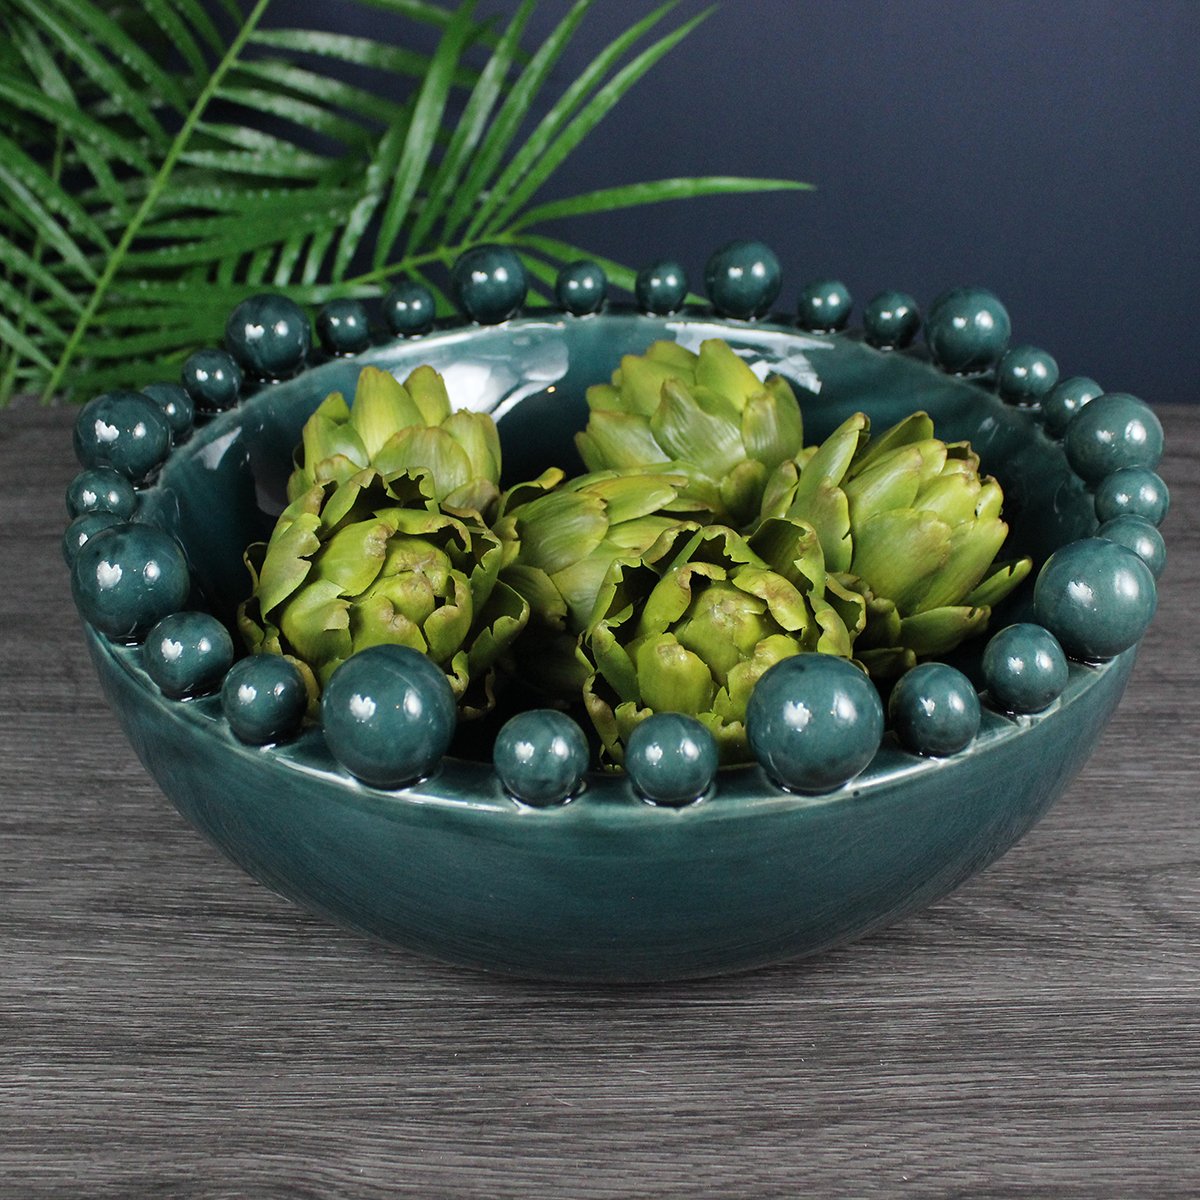 Our Teal Bowl can be filled with fruit, artichoke heads or dried flowers to create the perfect centrepiece 💜

#centrepiece #centerpiece #centerpieceideas #centrepieces #centrepieceideas #fruitbowl #bowl #decorativebowl #homedecor